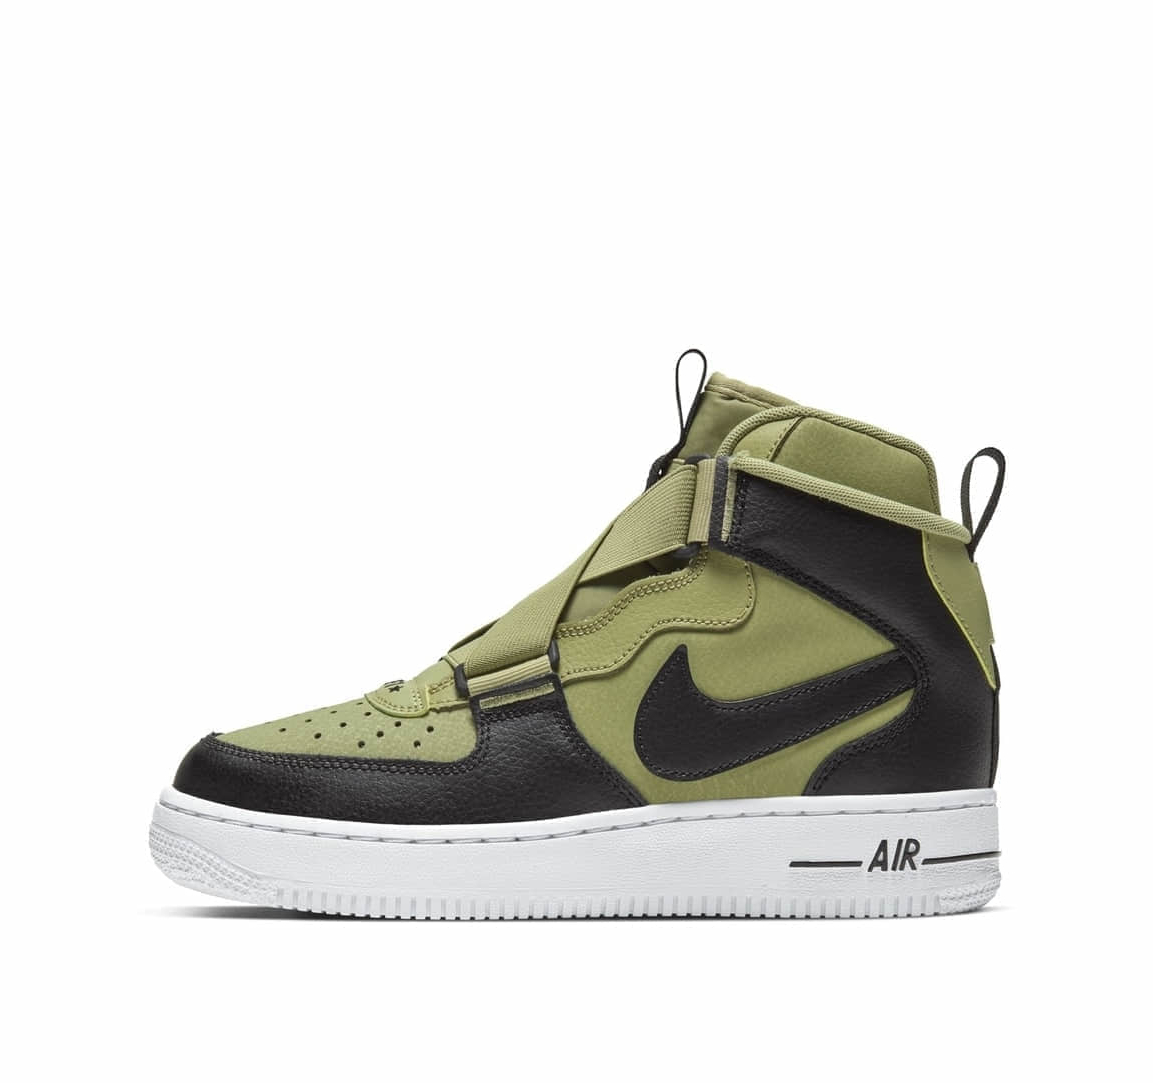 Nike Air Force 1 Highness GS 'Dusty Olive' BQ3598 300 - Premium Sneakers in Trendy Olive Shade